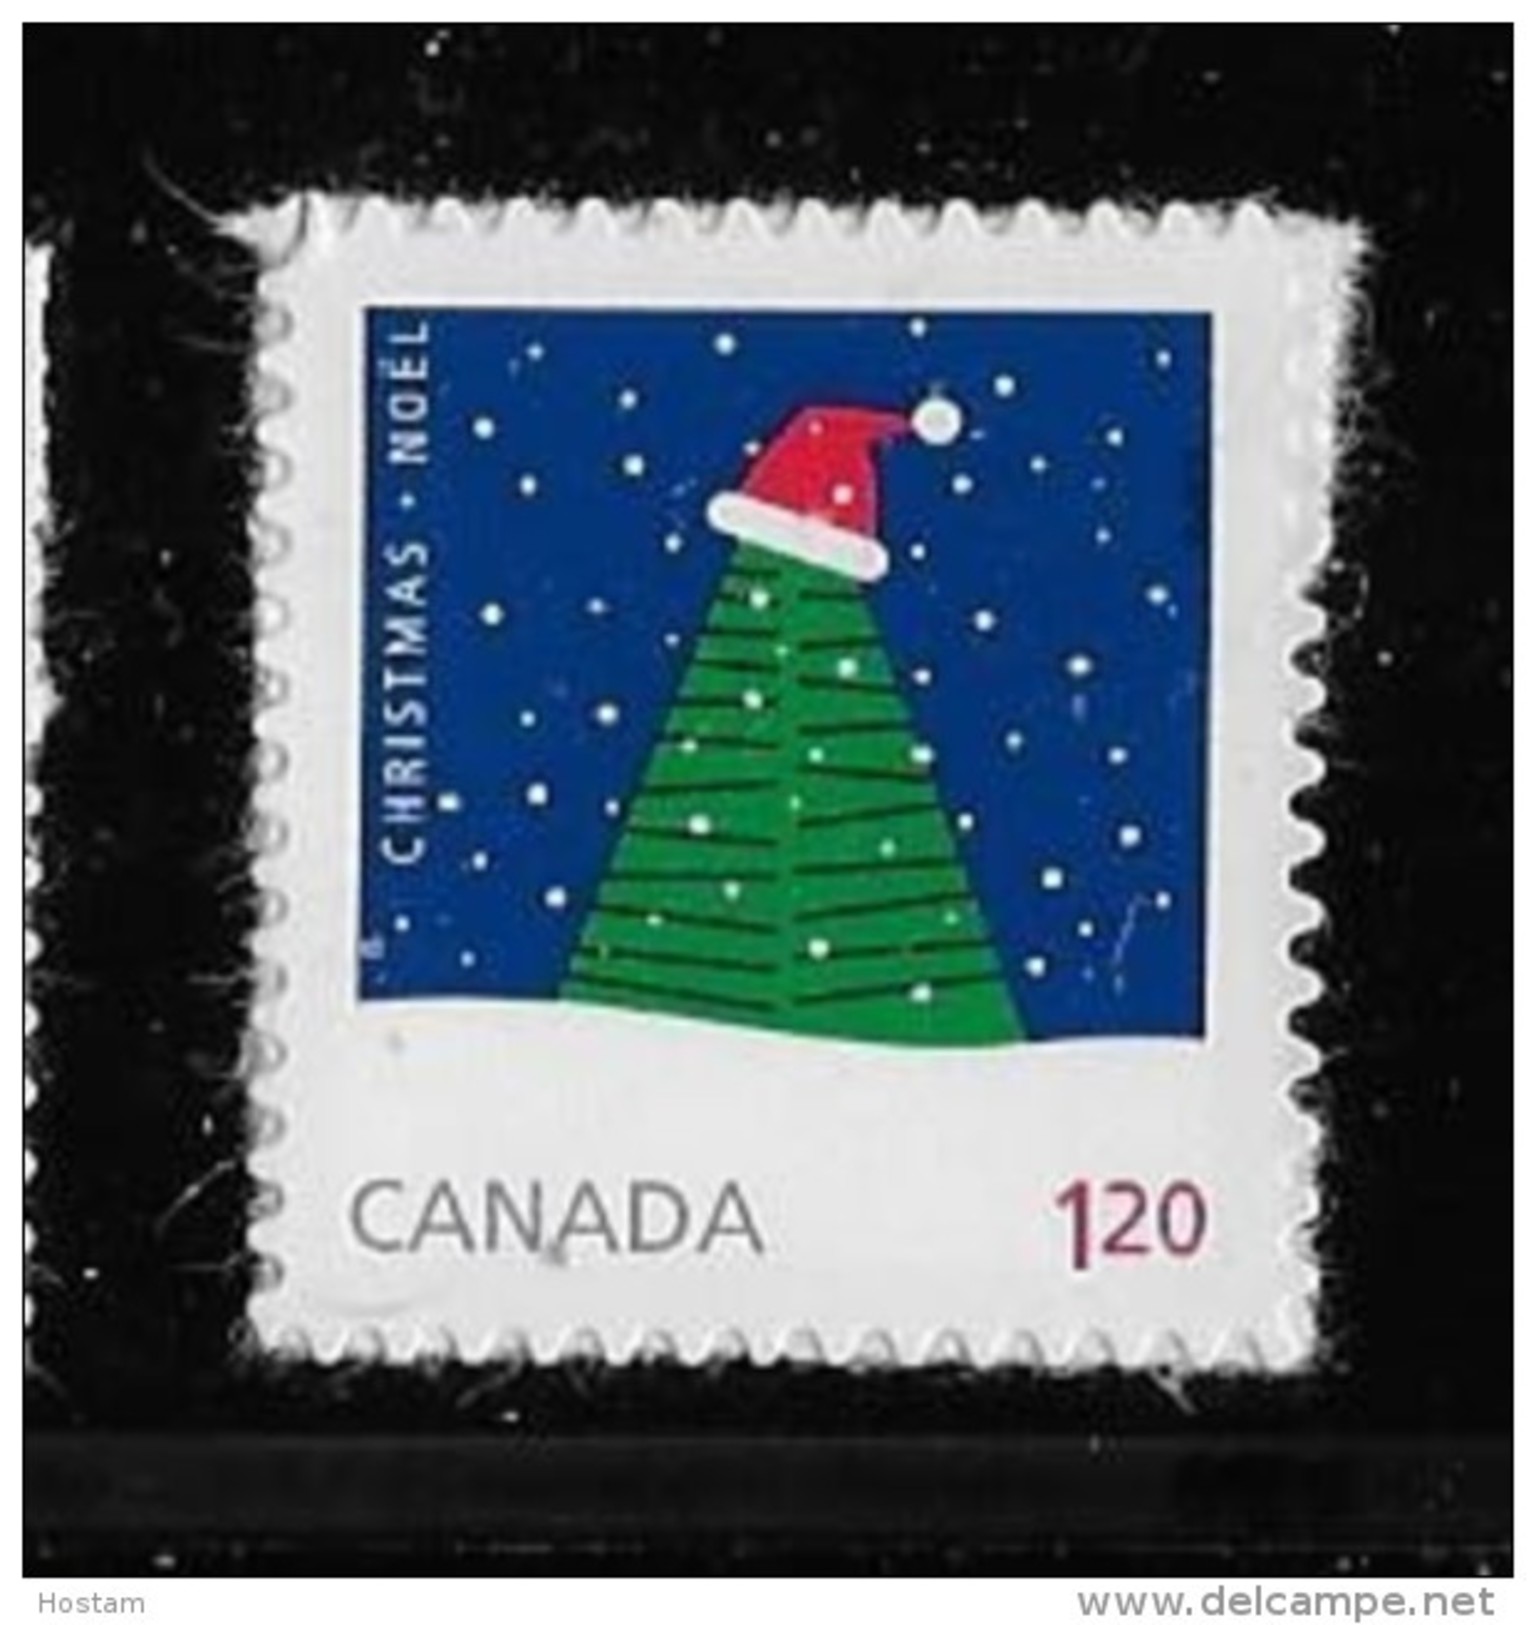 CANADA 2016, #2957   CHRISTMAS   TREE  With SANTA  HAT  Single   USA  Rate Stamp MNH - Timbres Seuls